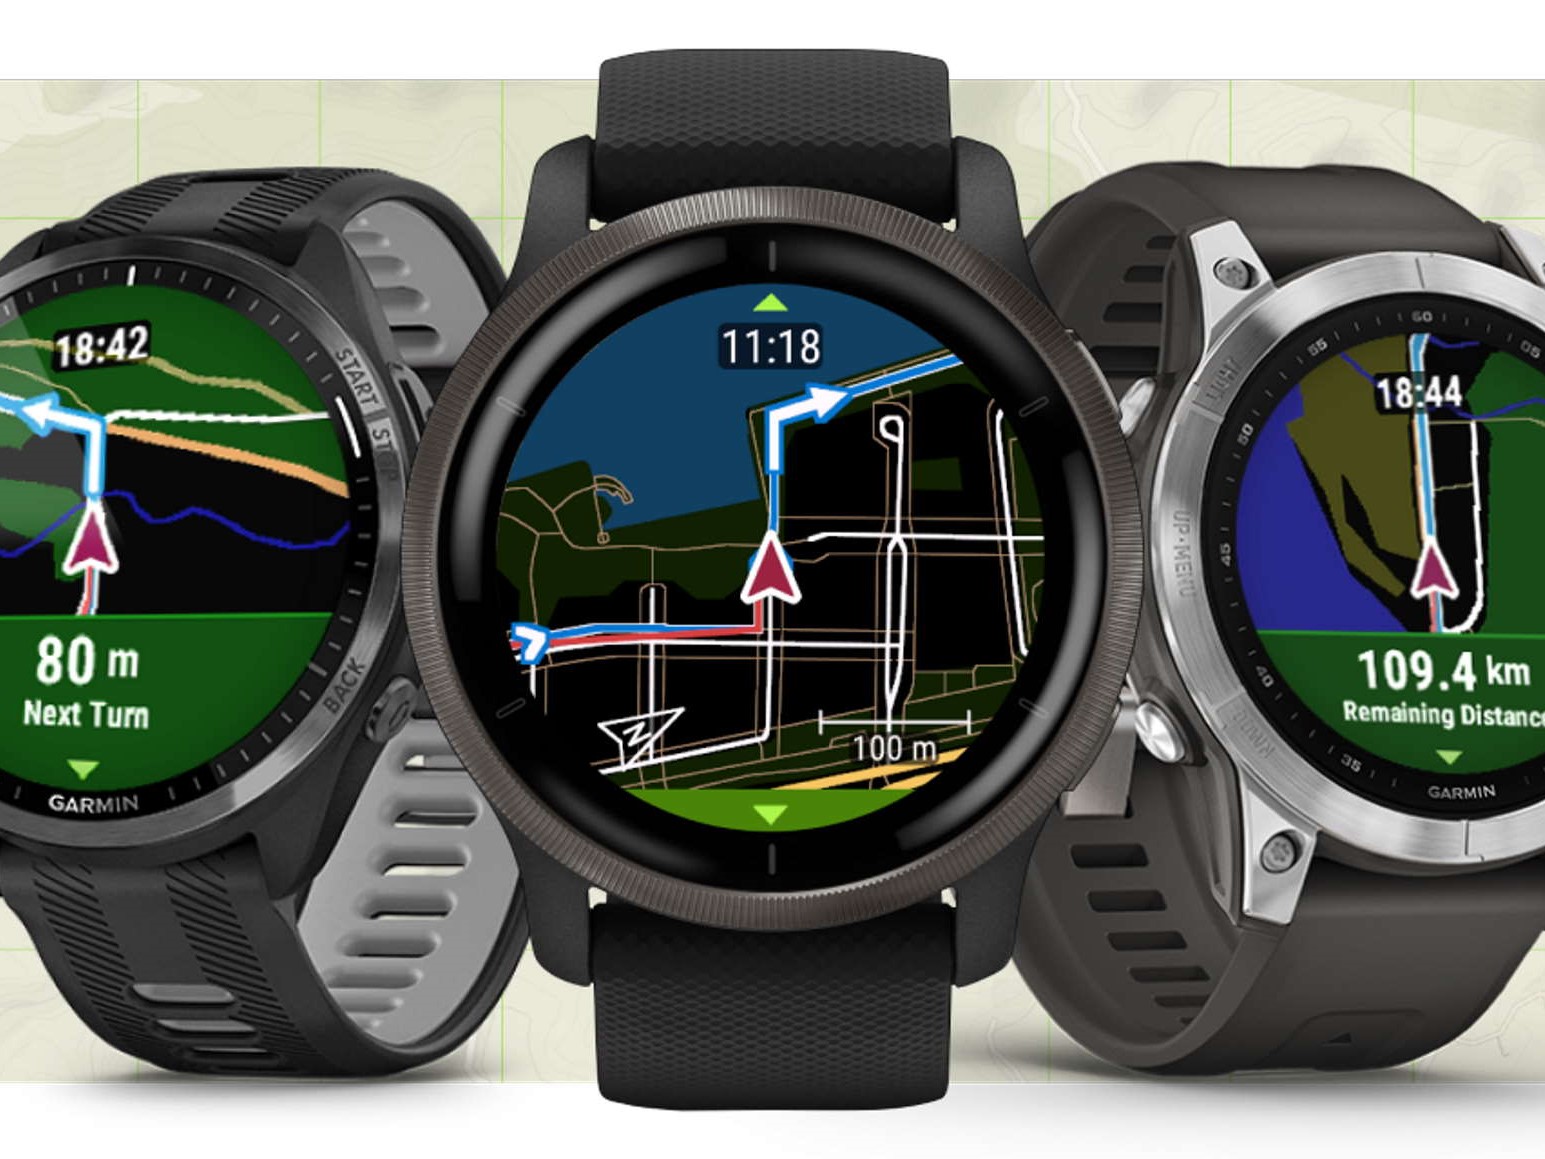 Garmin smartwatches and bike computers get new Komoot maps feature